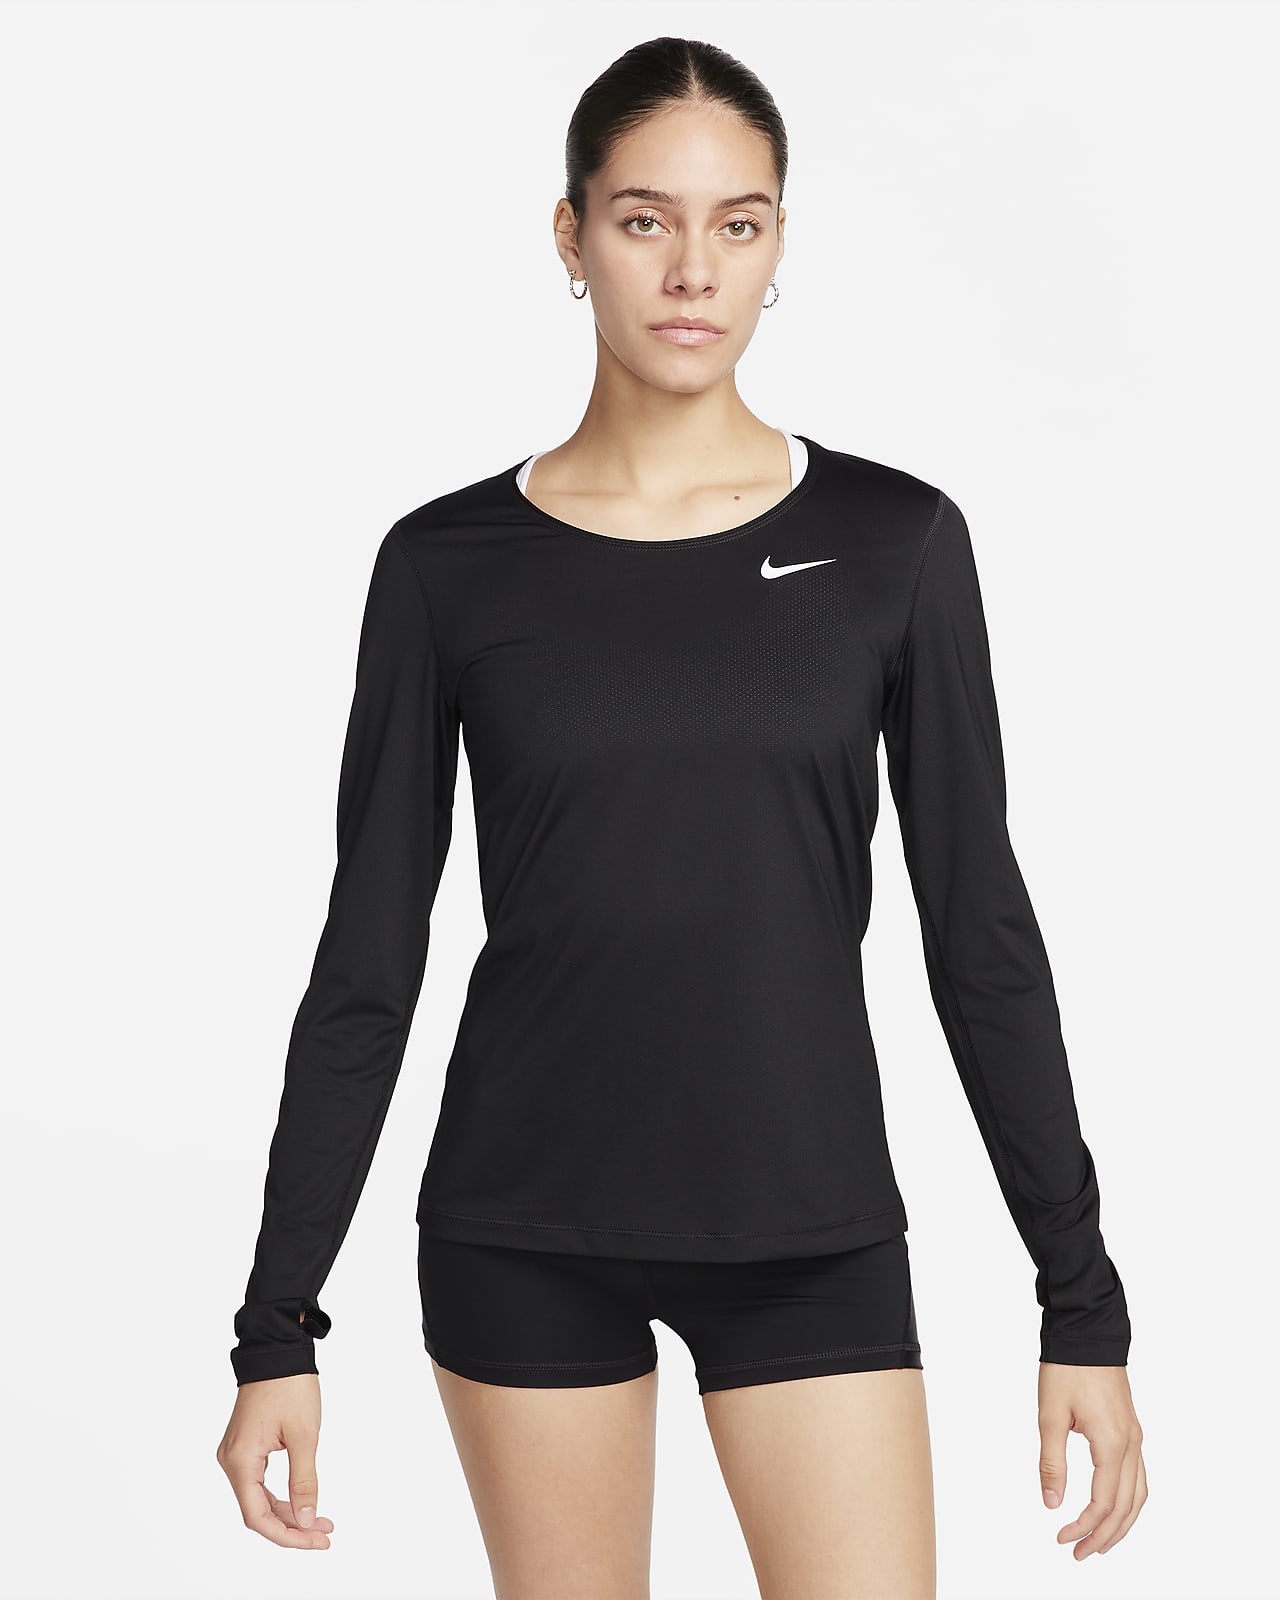 The Best Nike Women's Long-sleeve Workout Tops to Shop Now. Nike BG